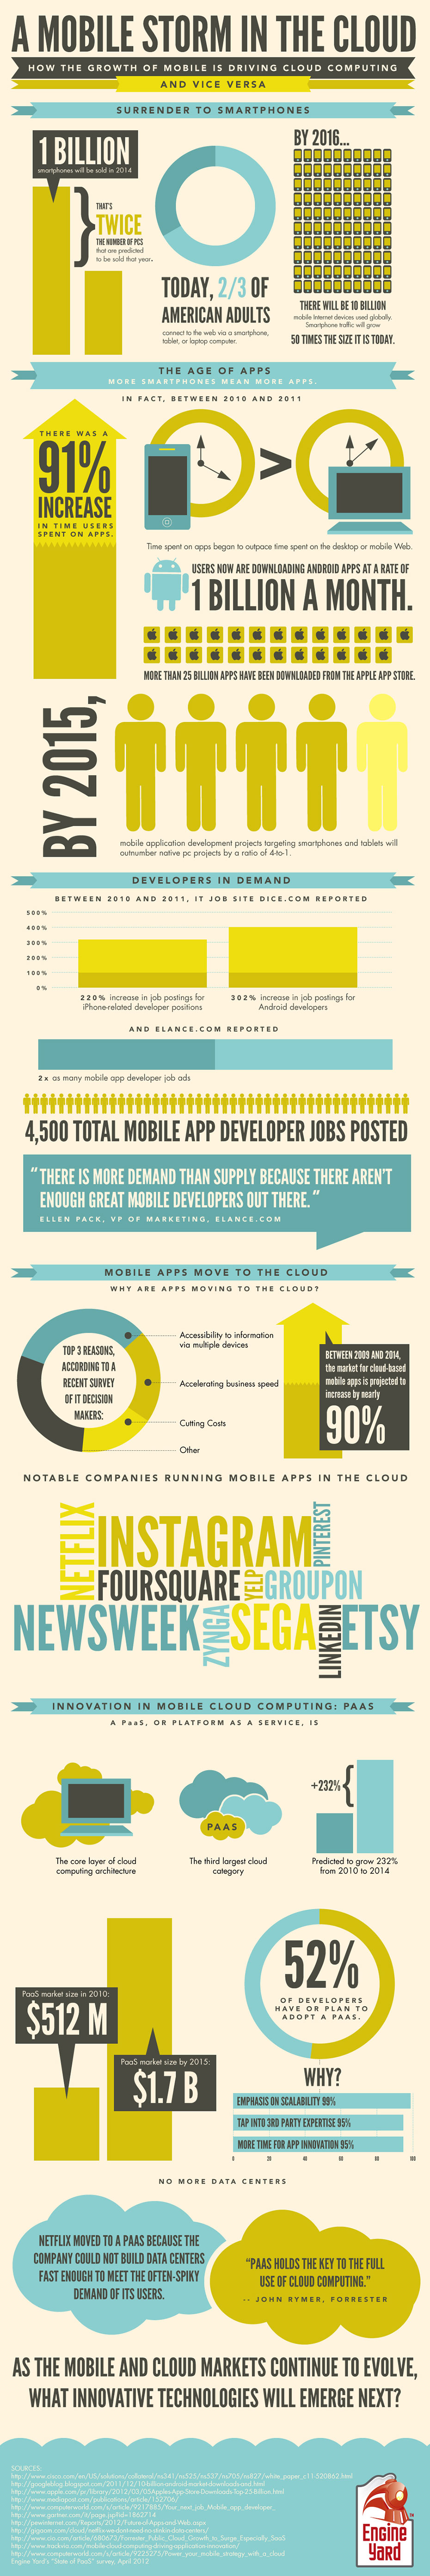 Mobile Apps And The Cloud Are Now In A Relationship